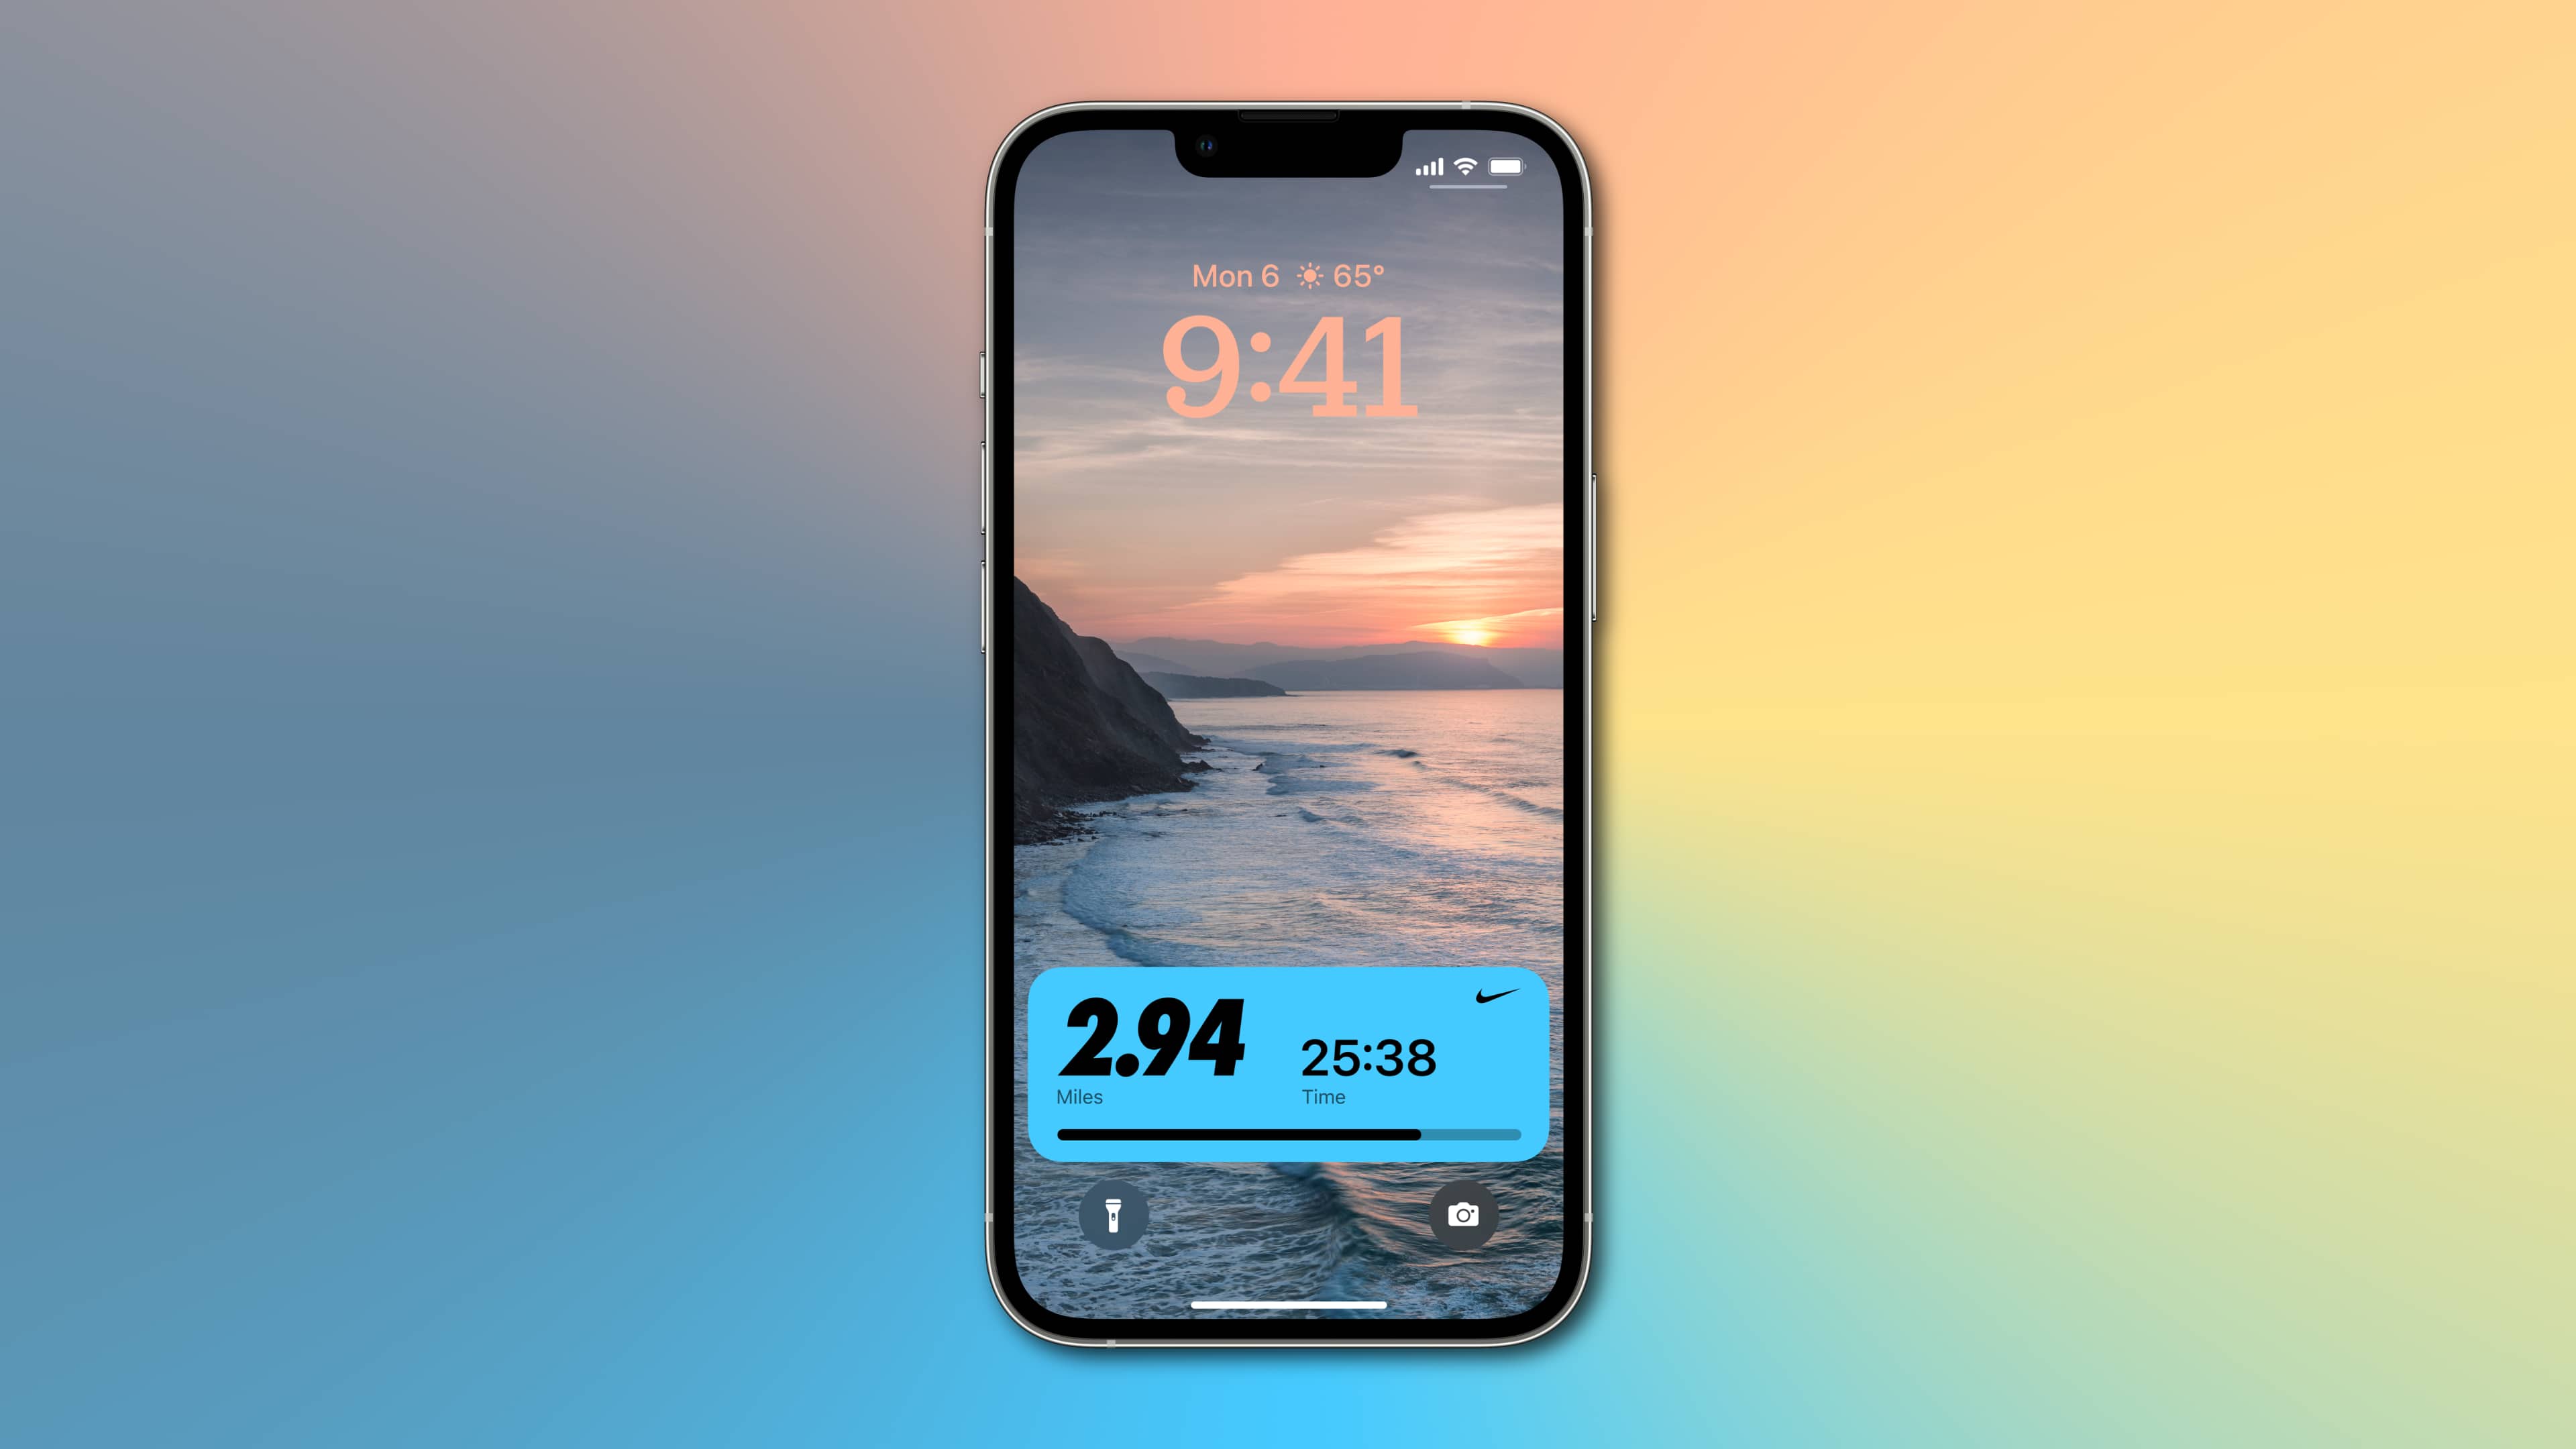 iPhone screenshot showcasing getting real-time workout metrics from the Nike Run Club app on the lock screen with the new Live Activities feature in iOS 16